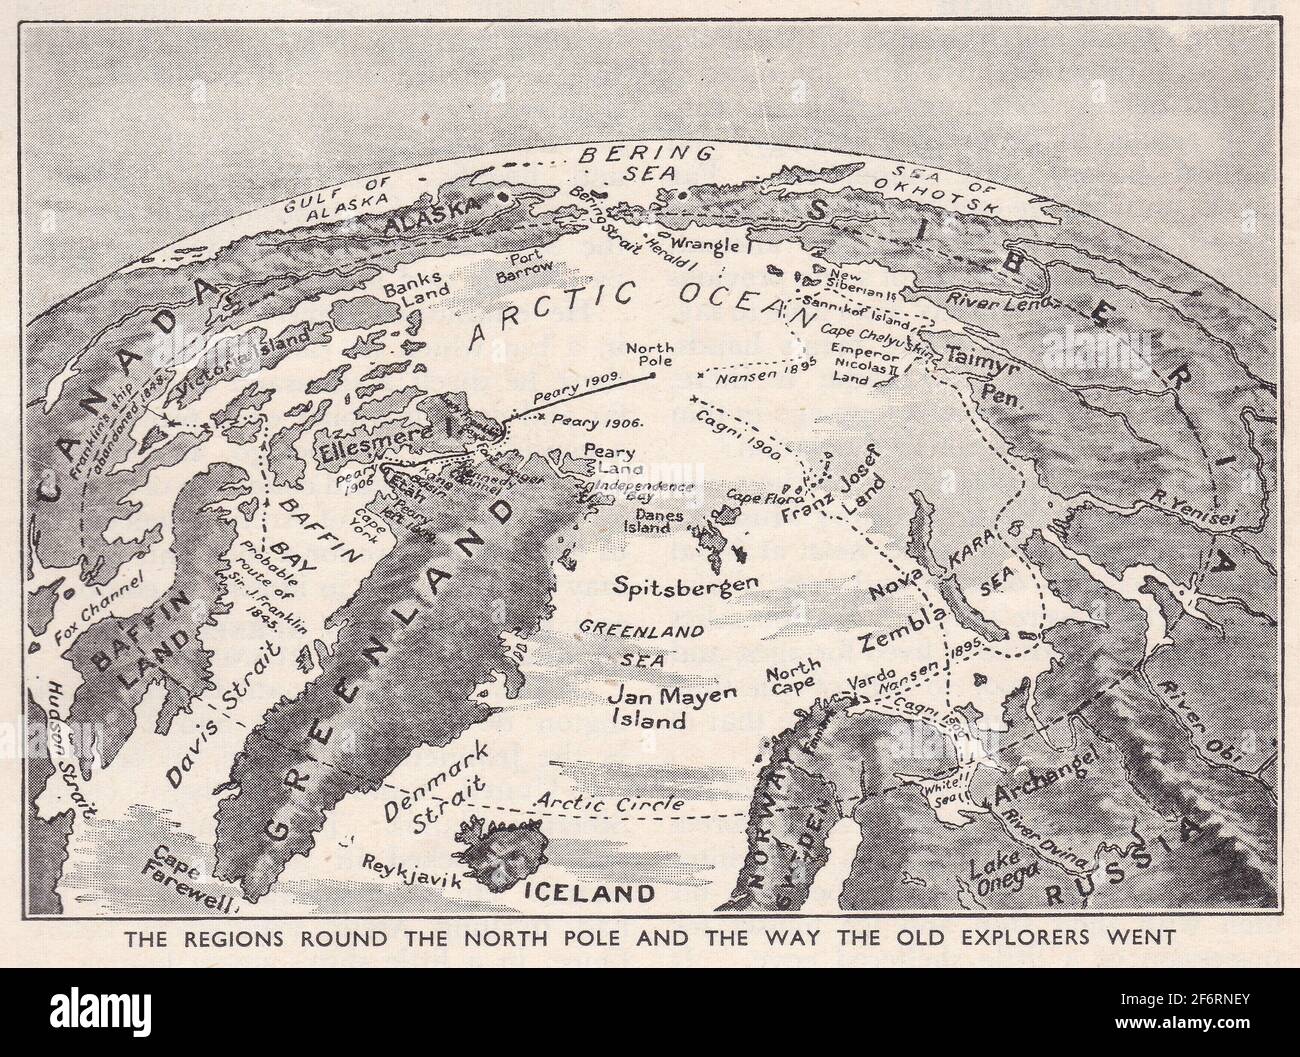 Vintage illustrated map of the regions round the North Pole and the way the old explorers went. Stock Photo